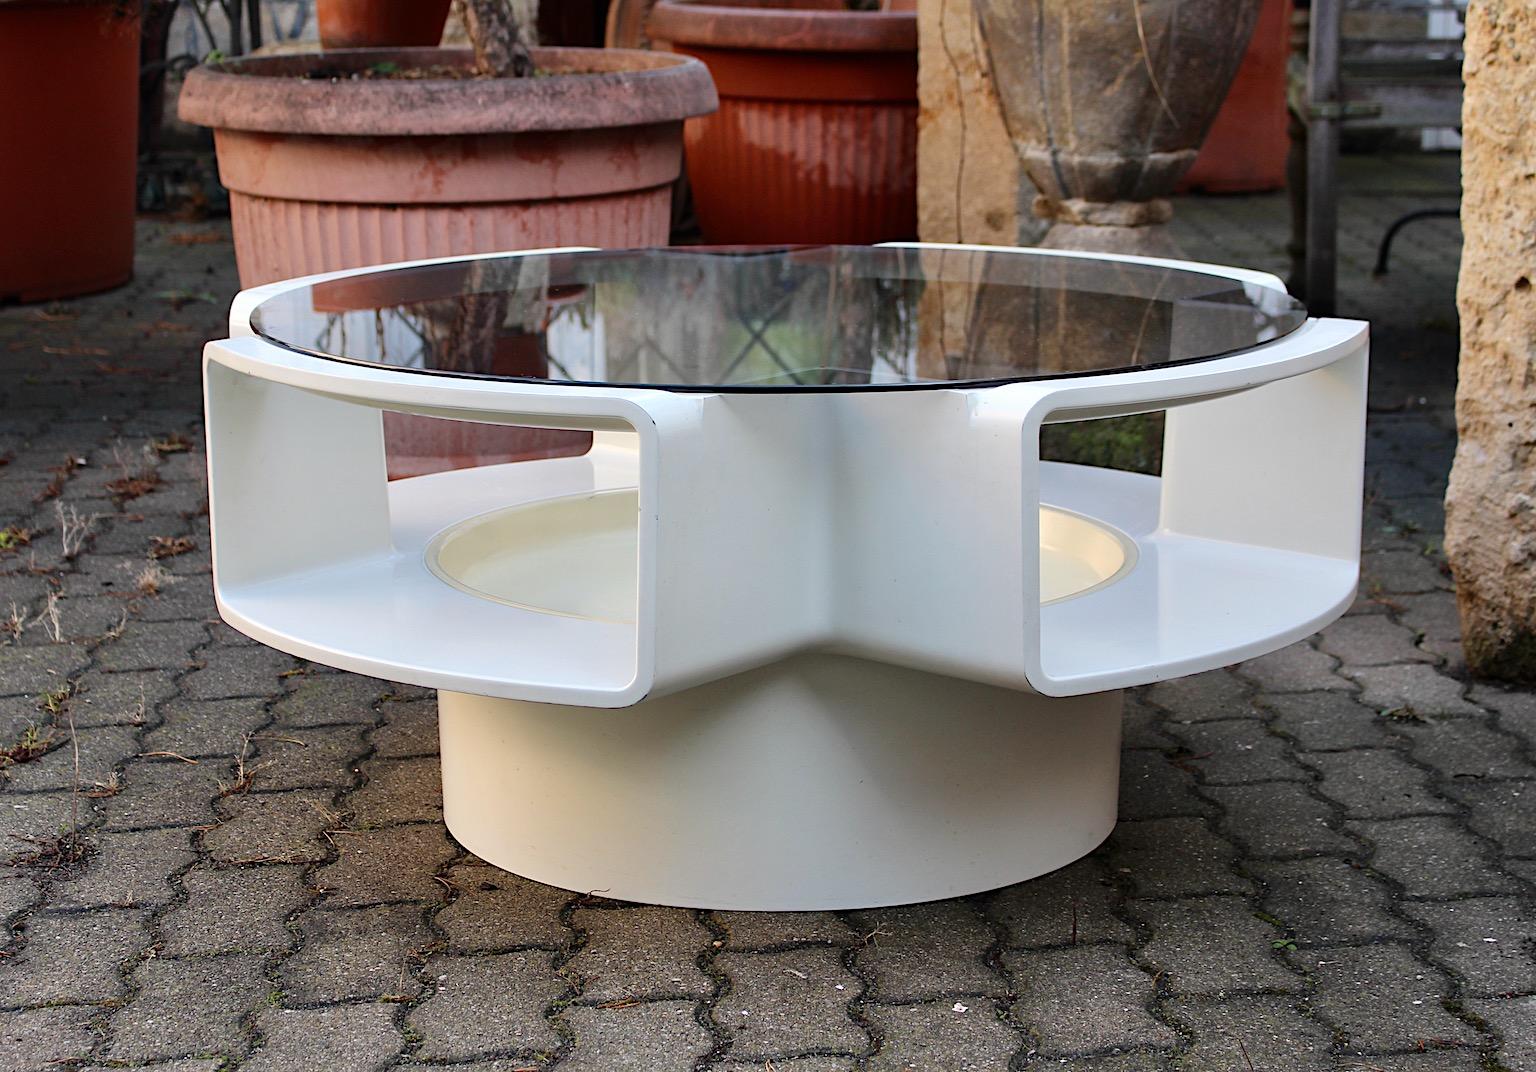 space age table